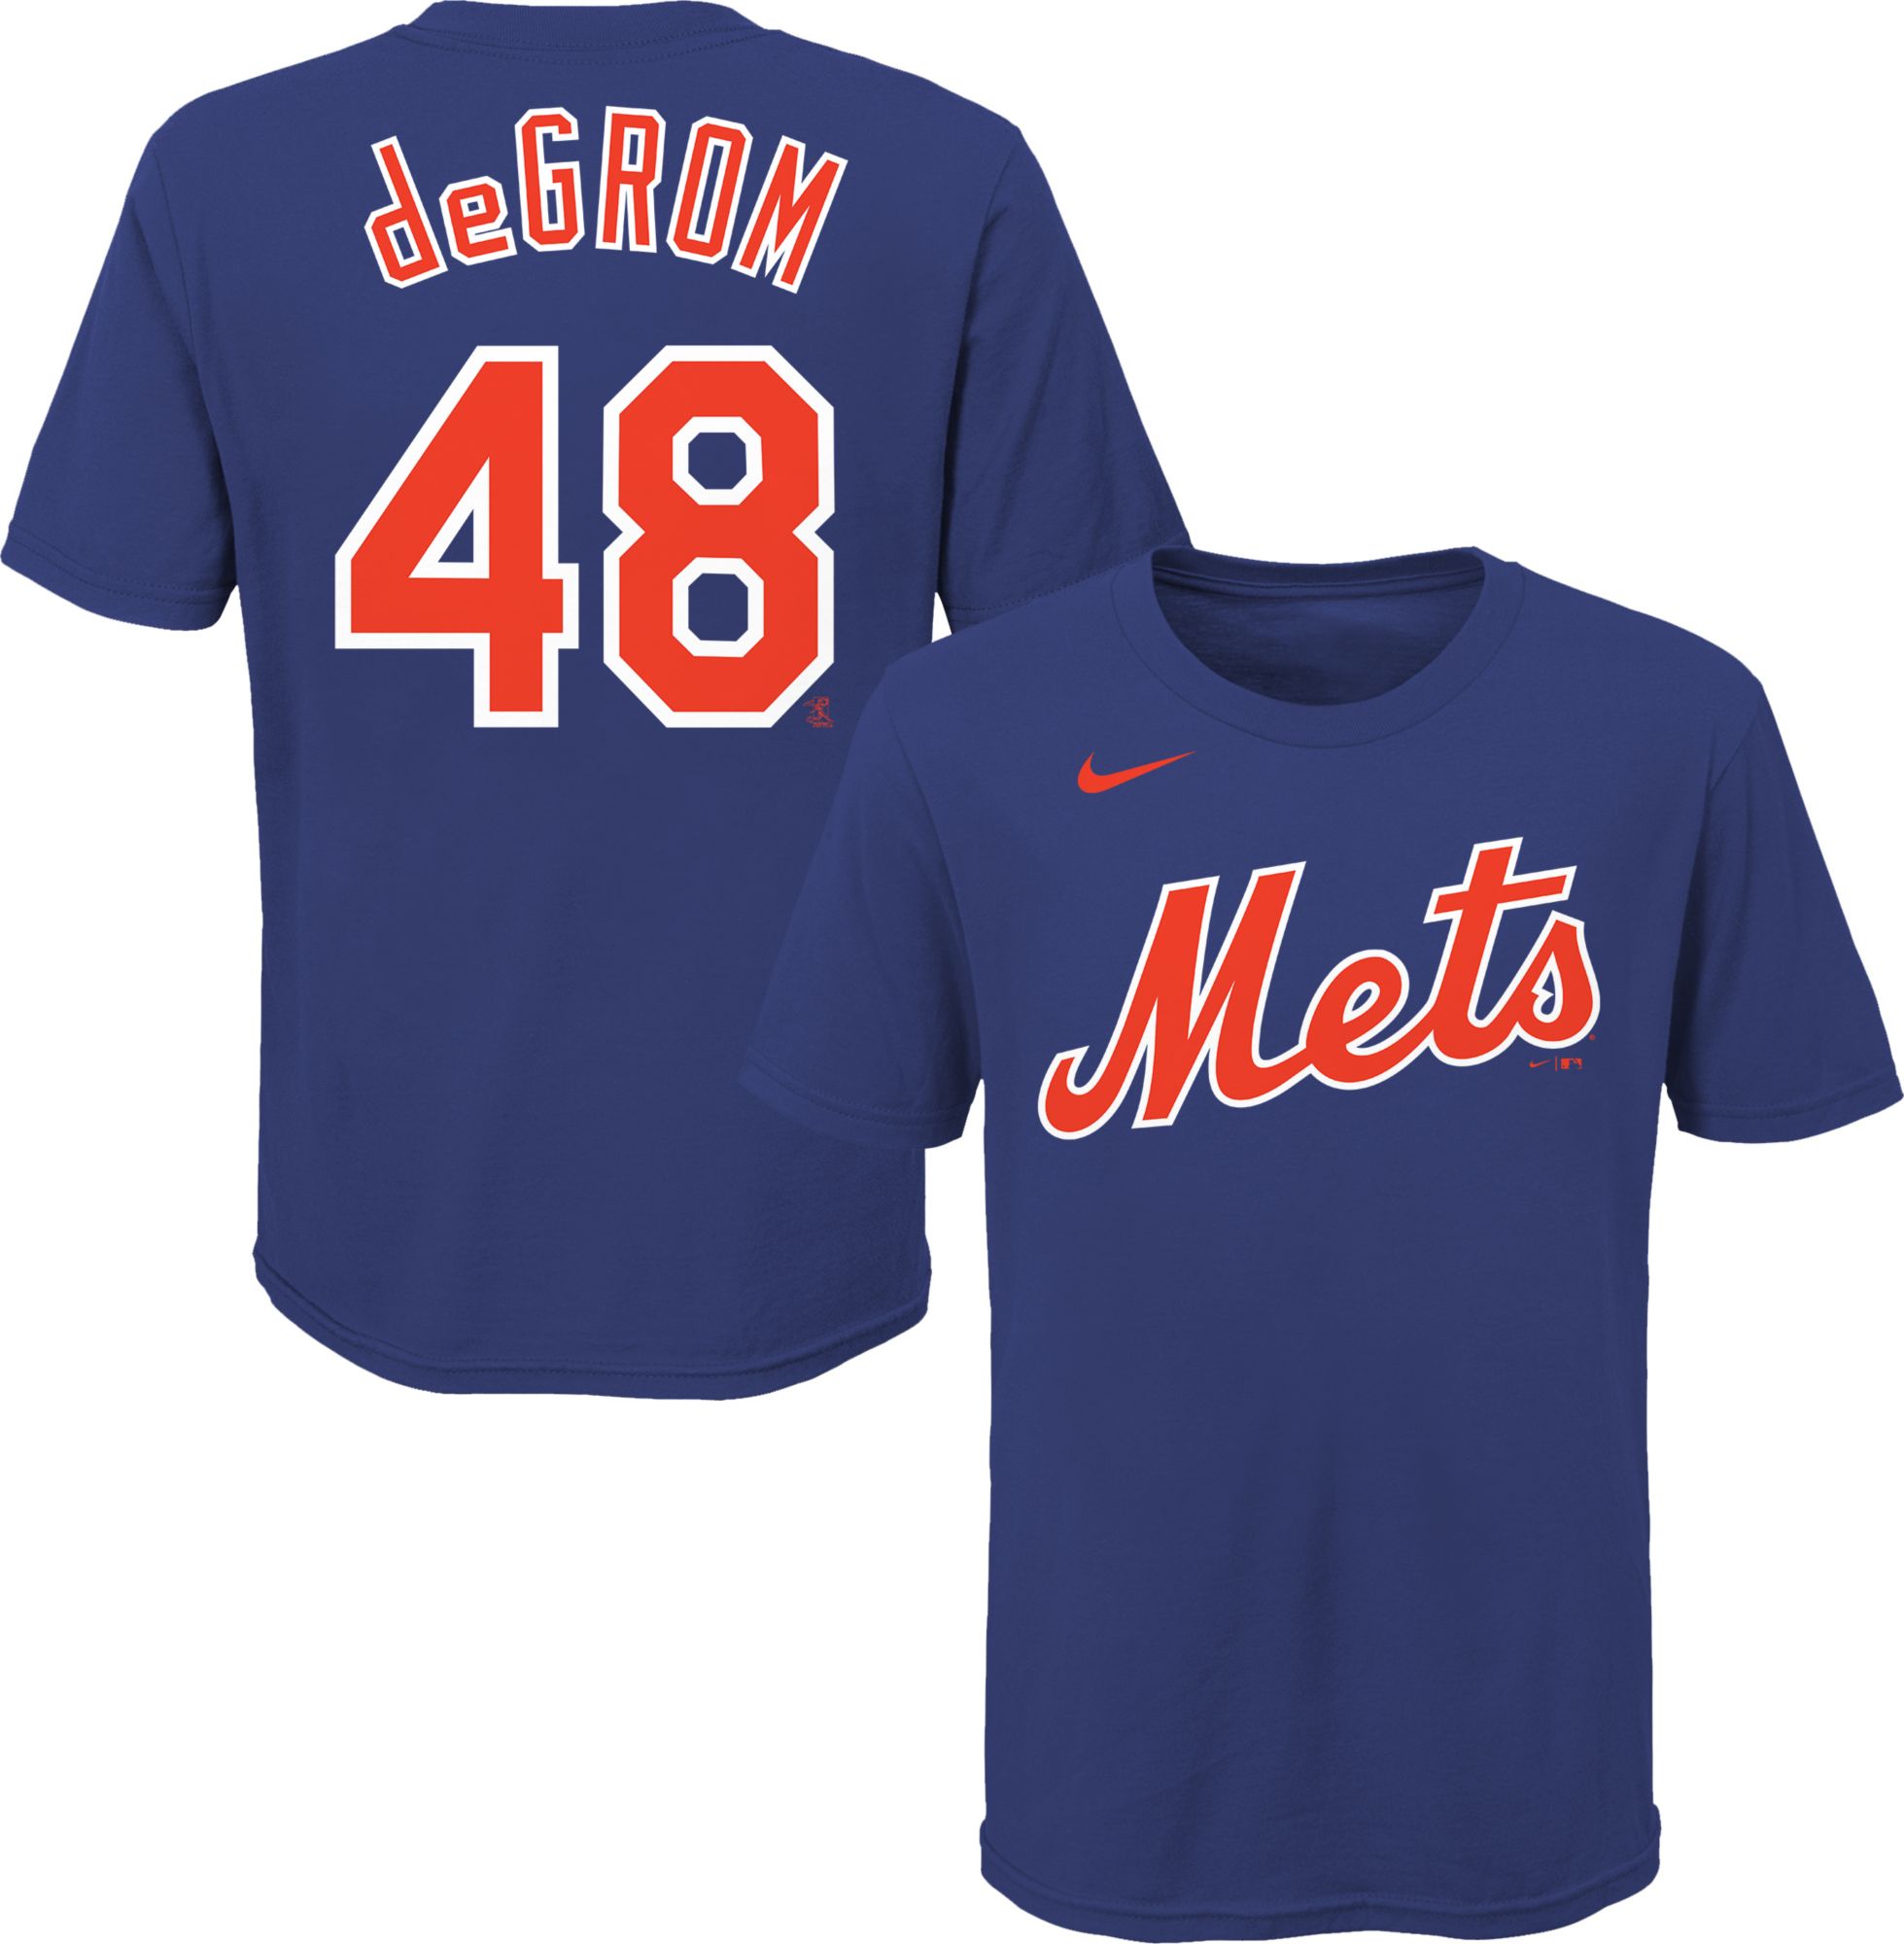 New York Mets Women's Apparel Curbside Pickup Available at DICK'S